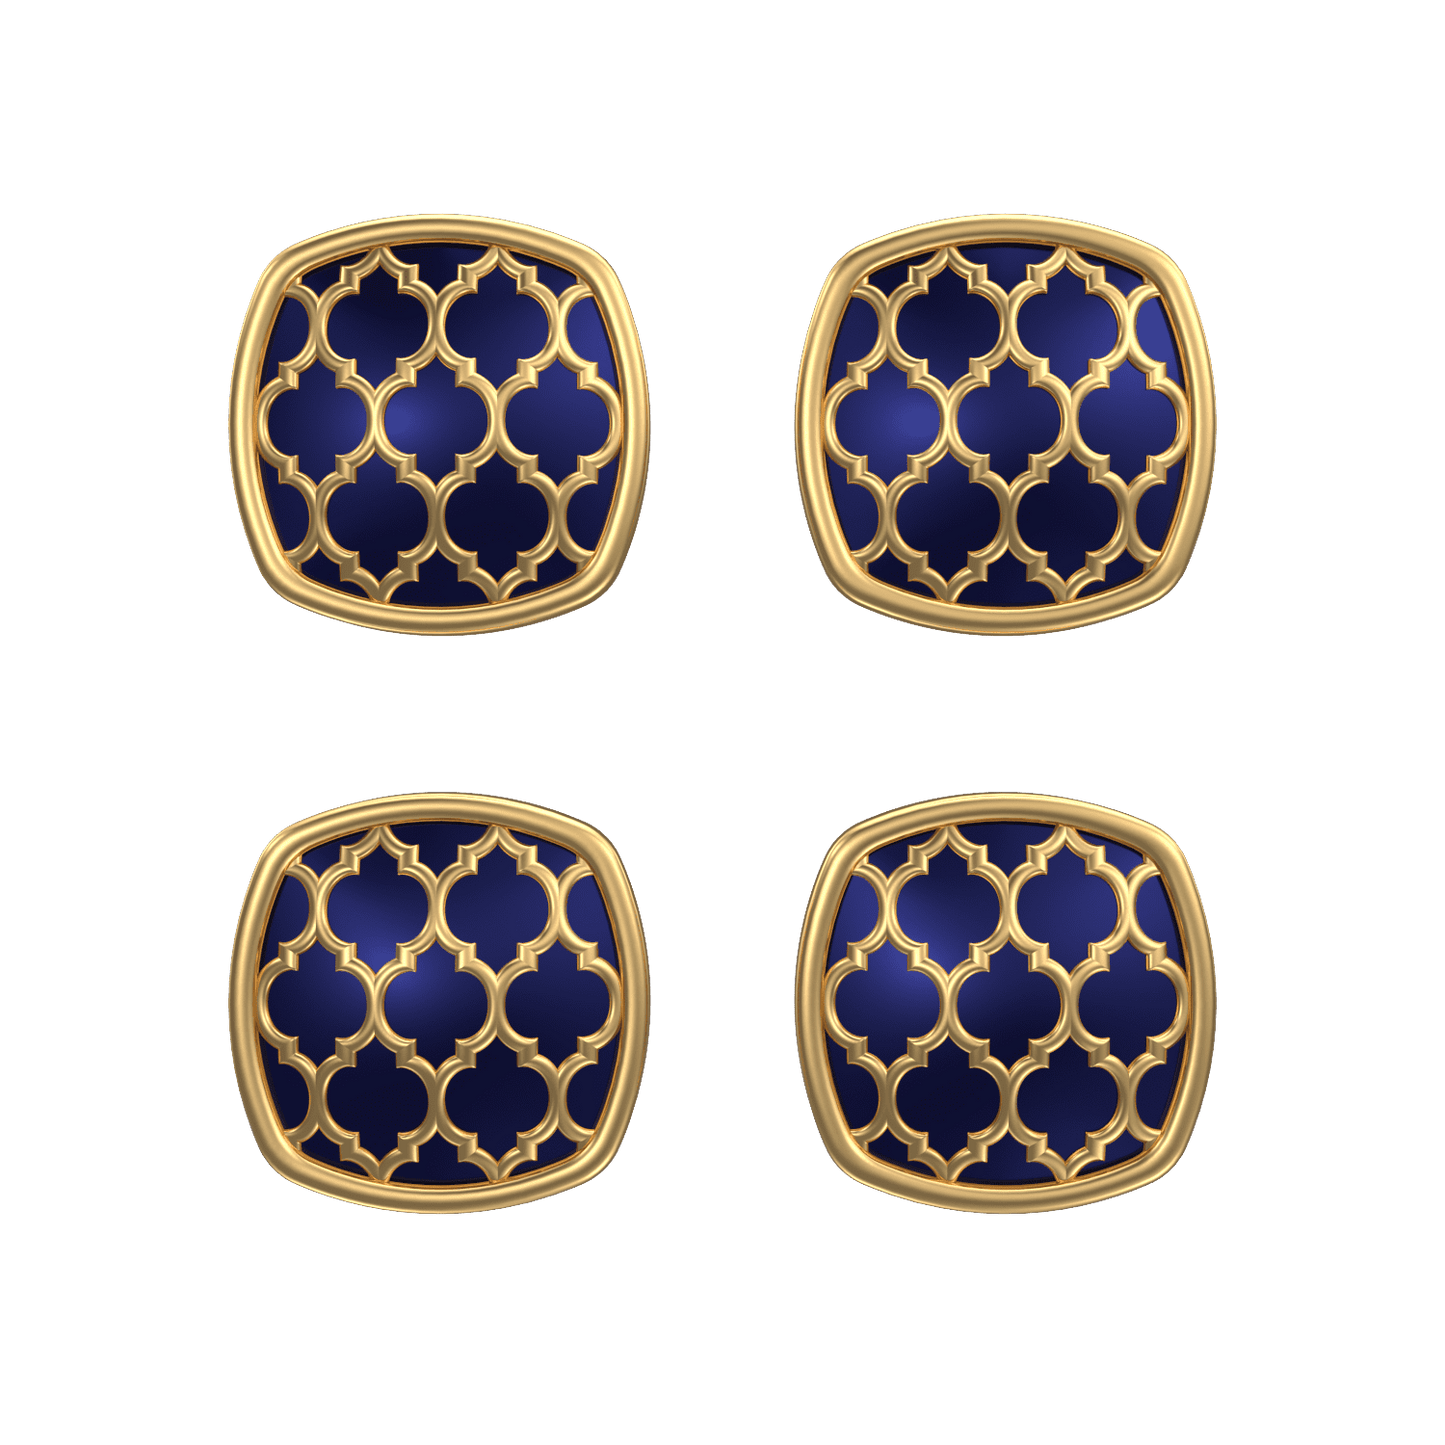 Ornate, Classic Kurta Button Set with 18kt Gold Plating and Enamel